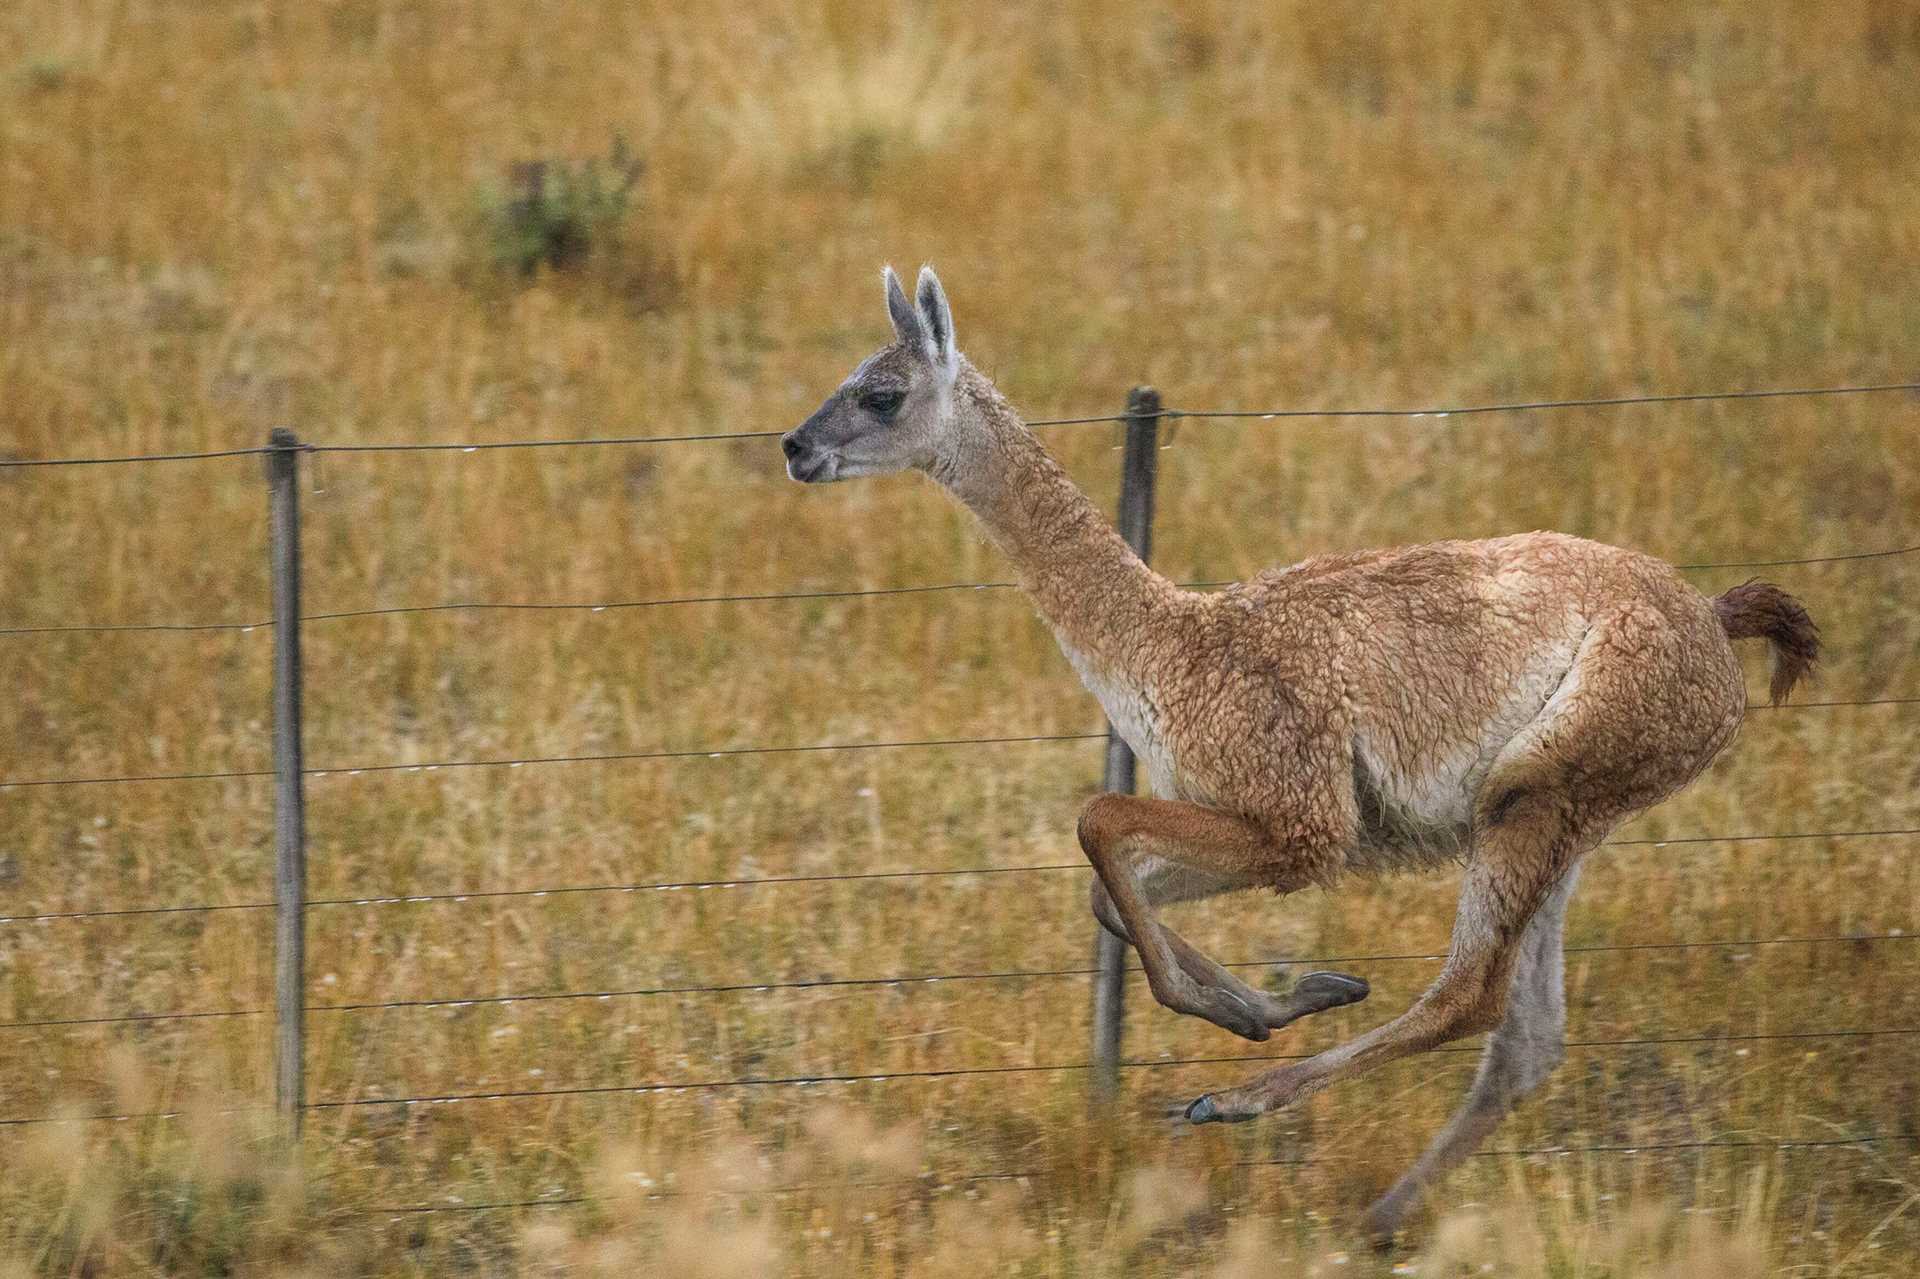 a guanaco stands next to a fence